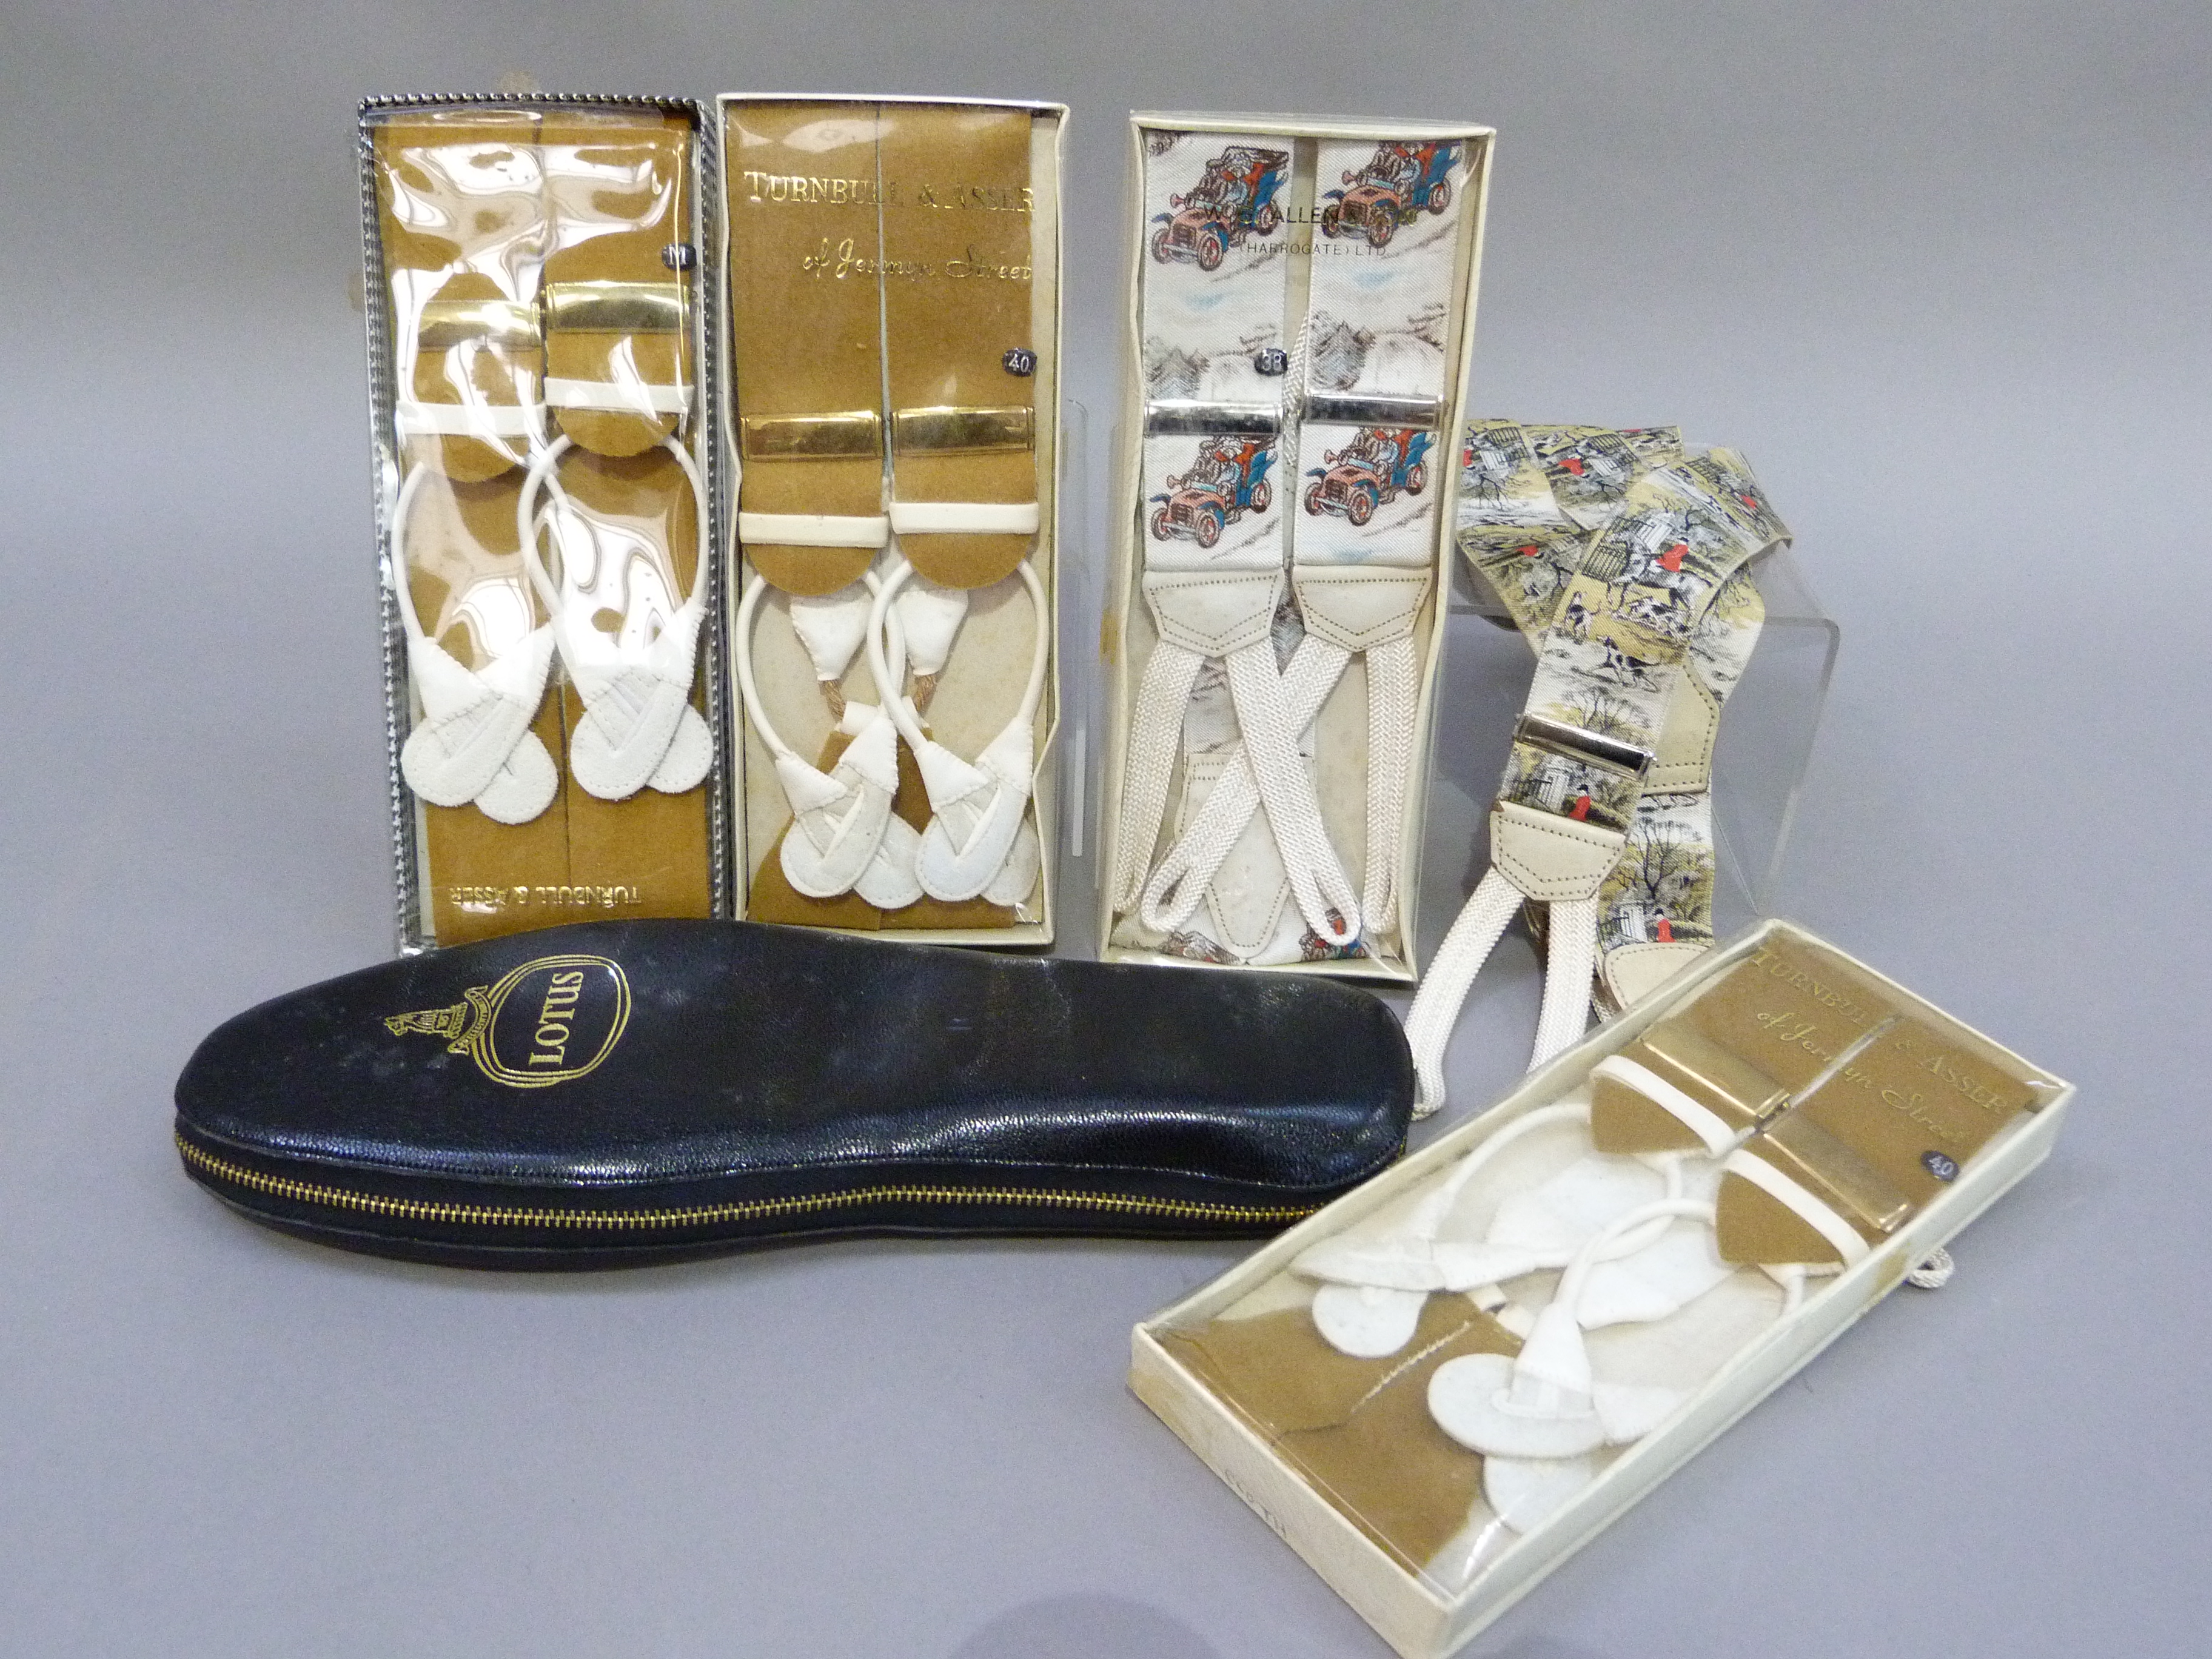 Three pairs of Turnbull & Asser of Jermyn Street braces in original boxes (as new), a pair by - Image 2 of 2